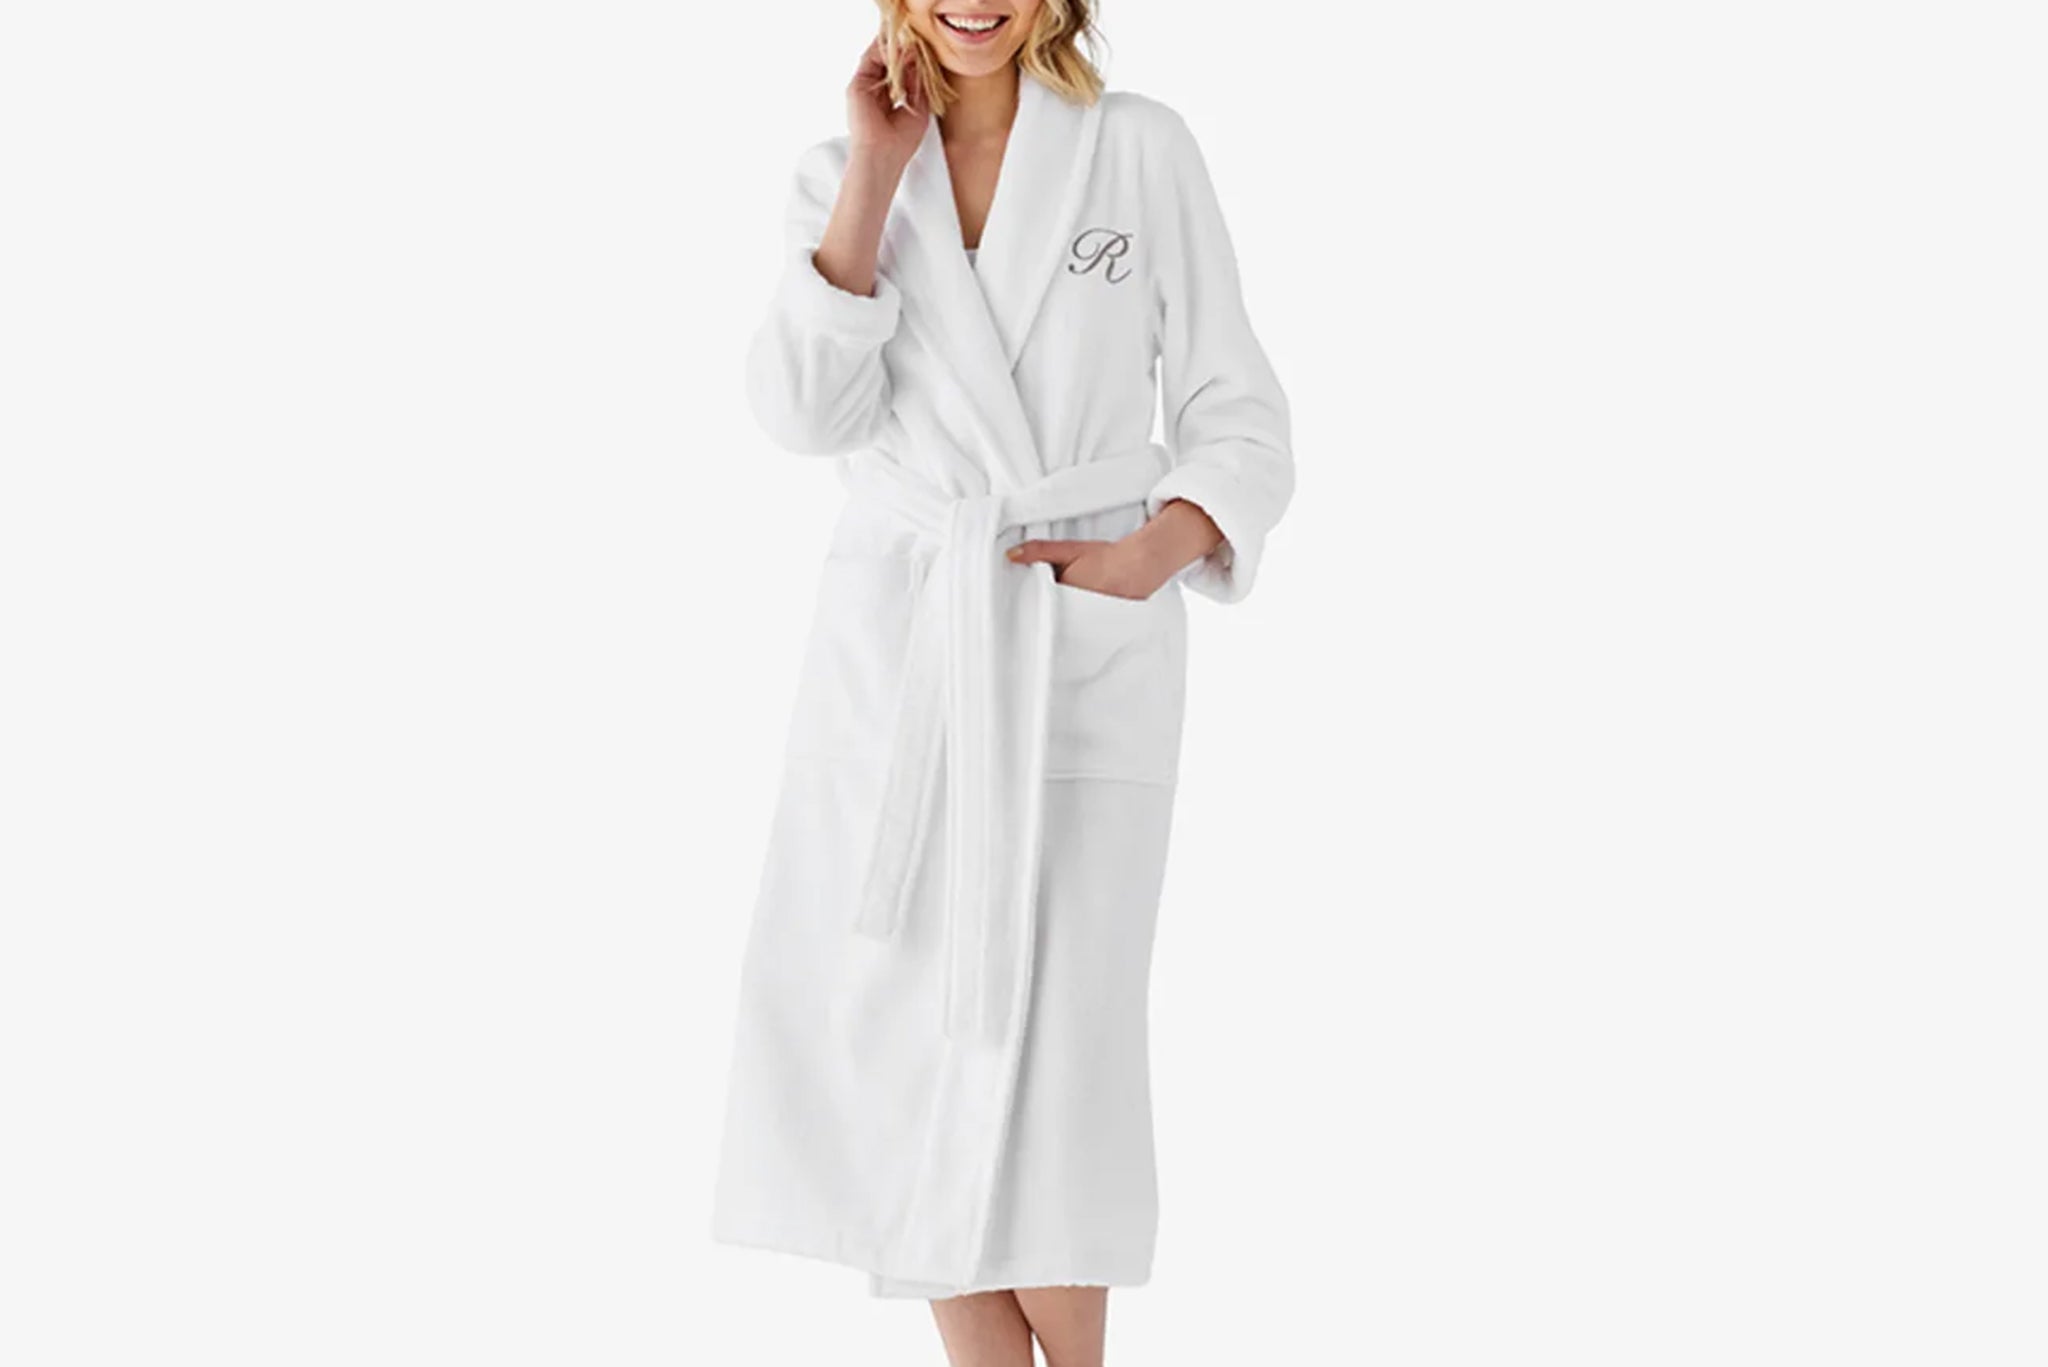 bethany barnes recommends bath robes for teens pic